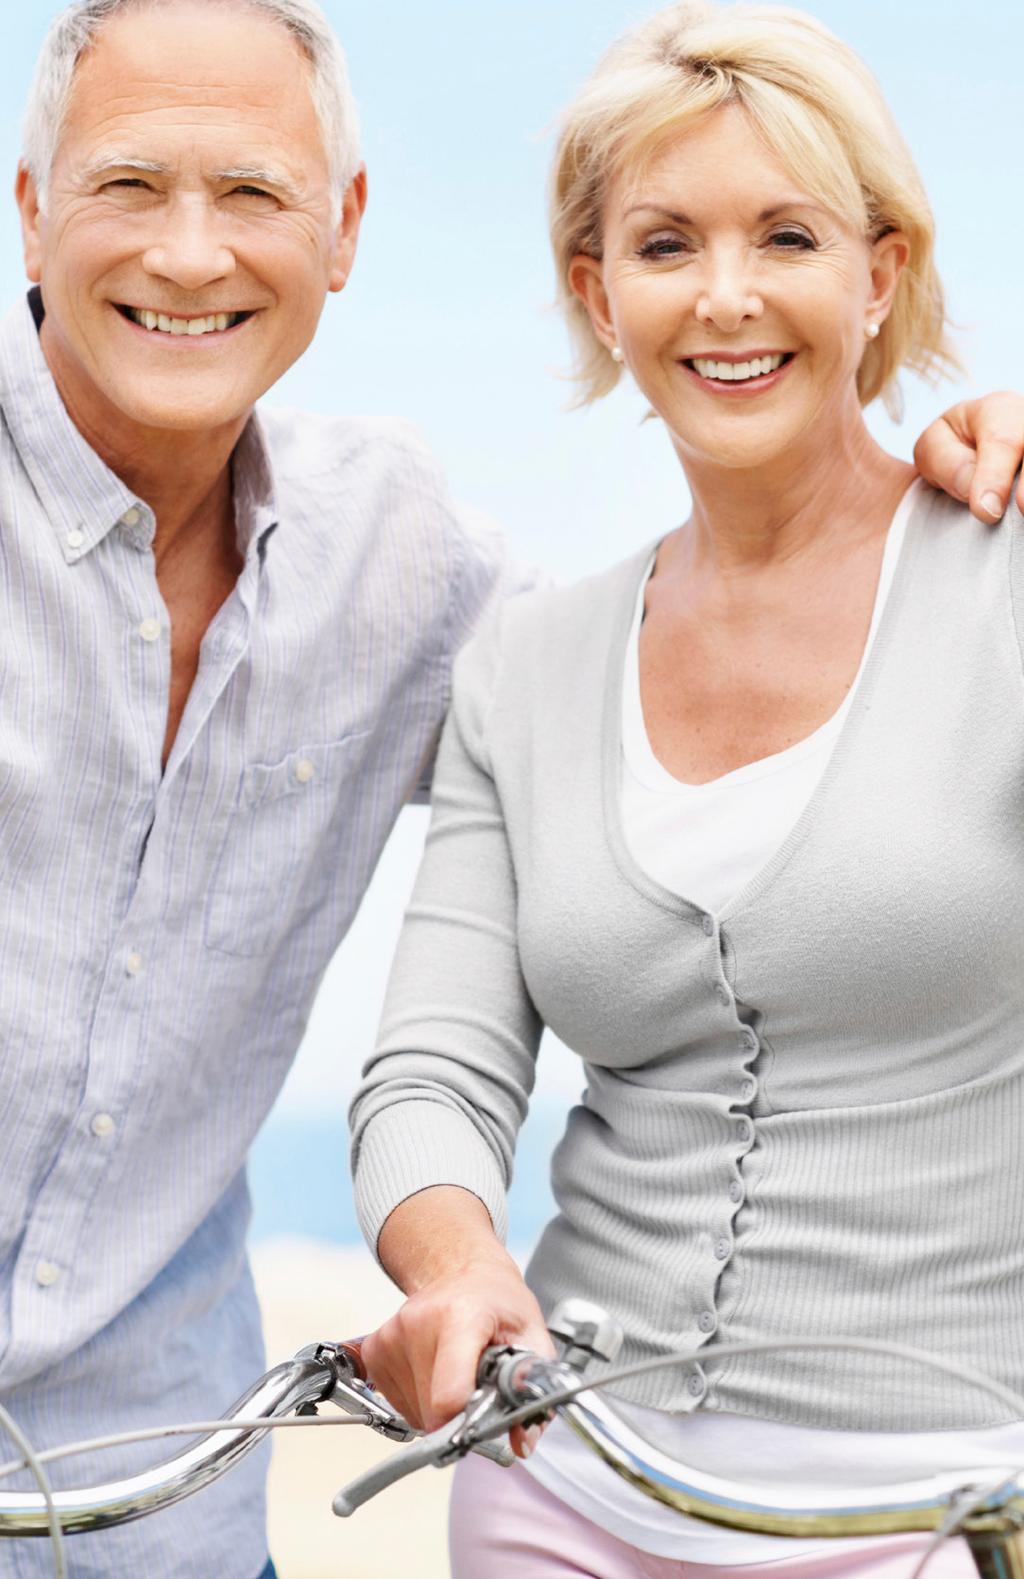 Welcome to our Aesthetic Medicine practice where we will be introducing our clients to bioidentical hormone replacement.